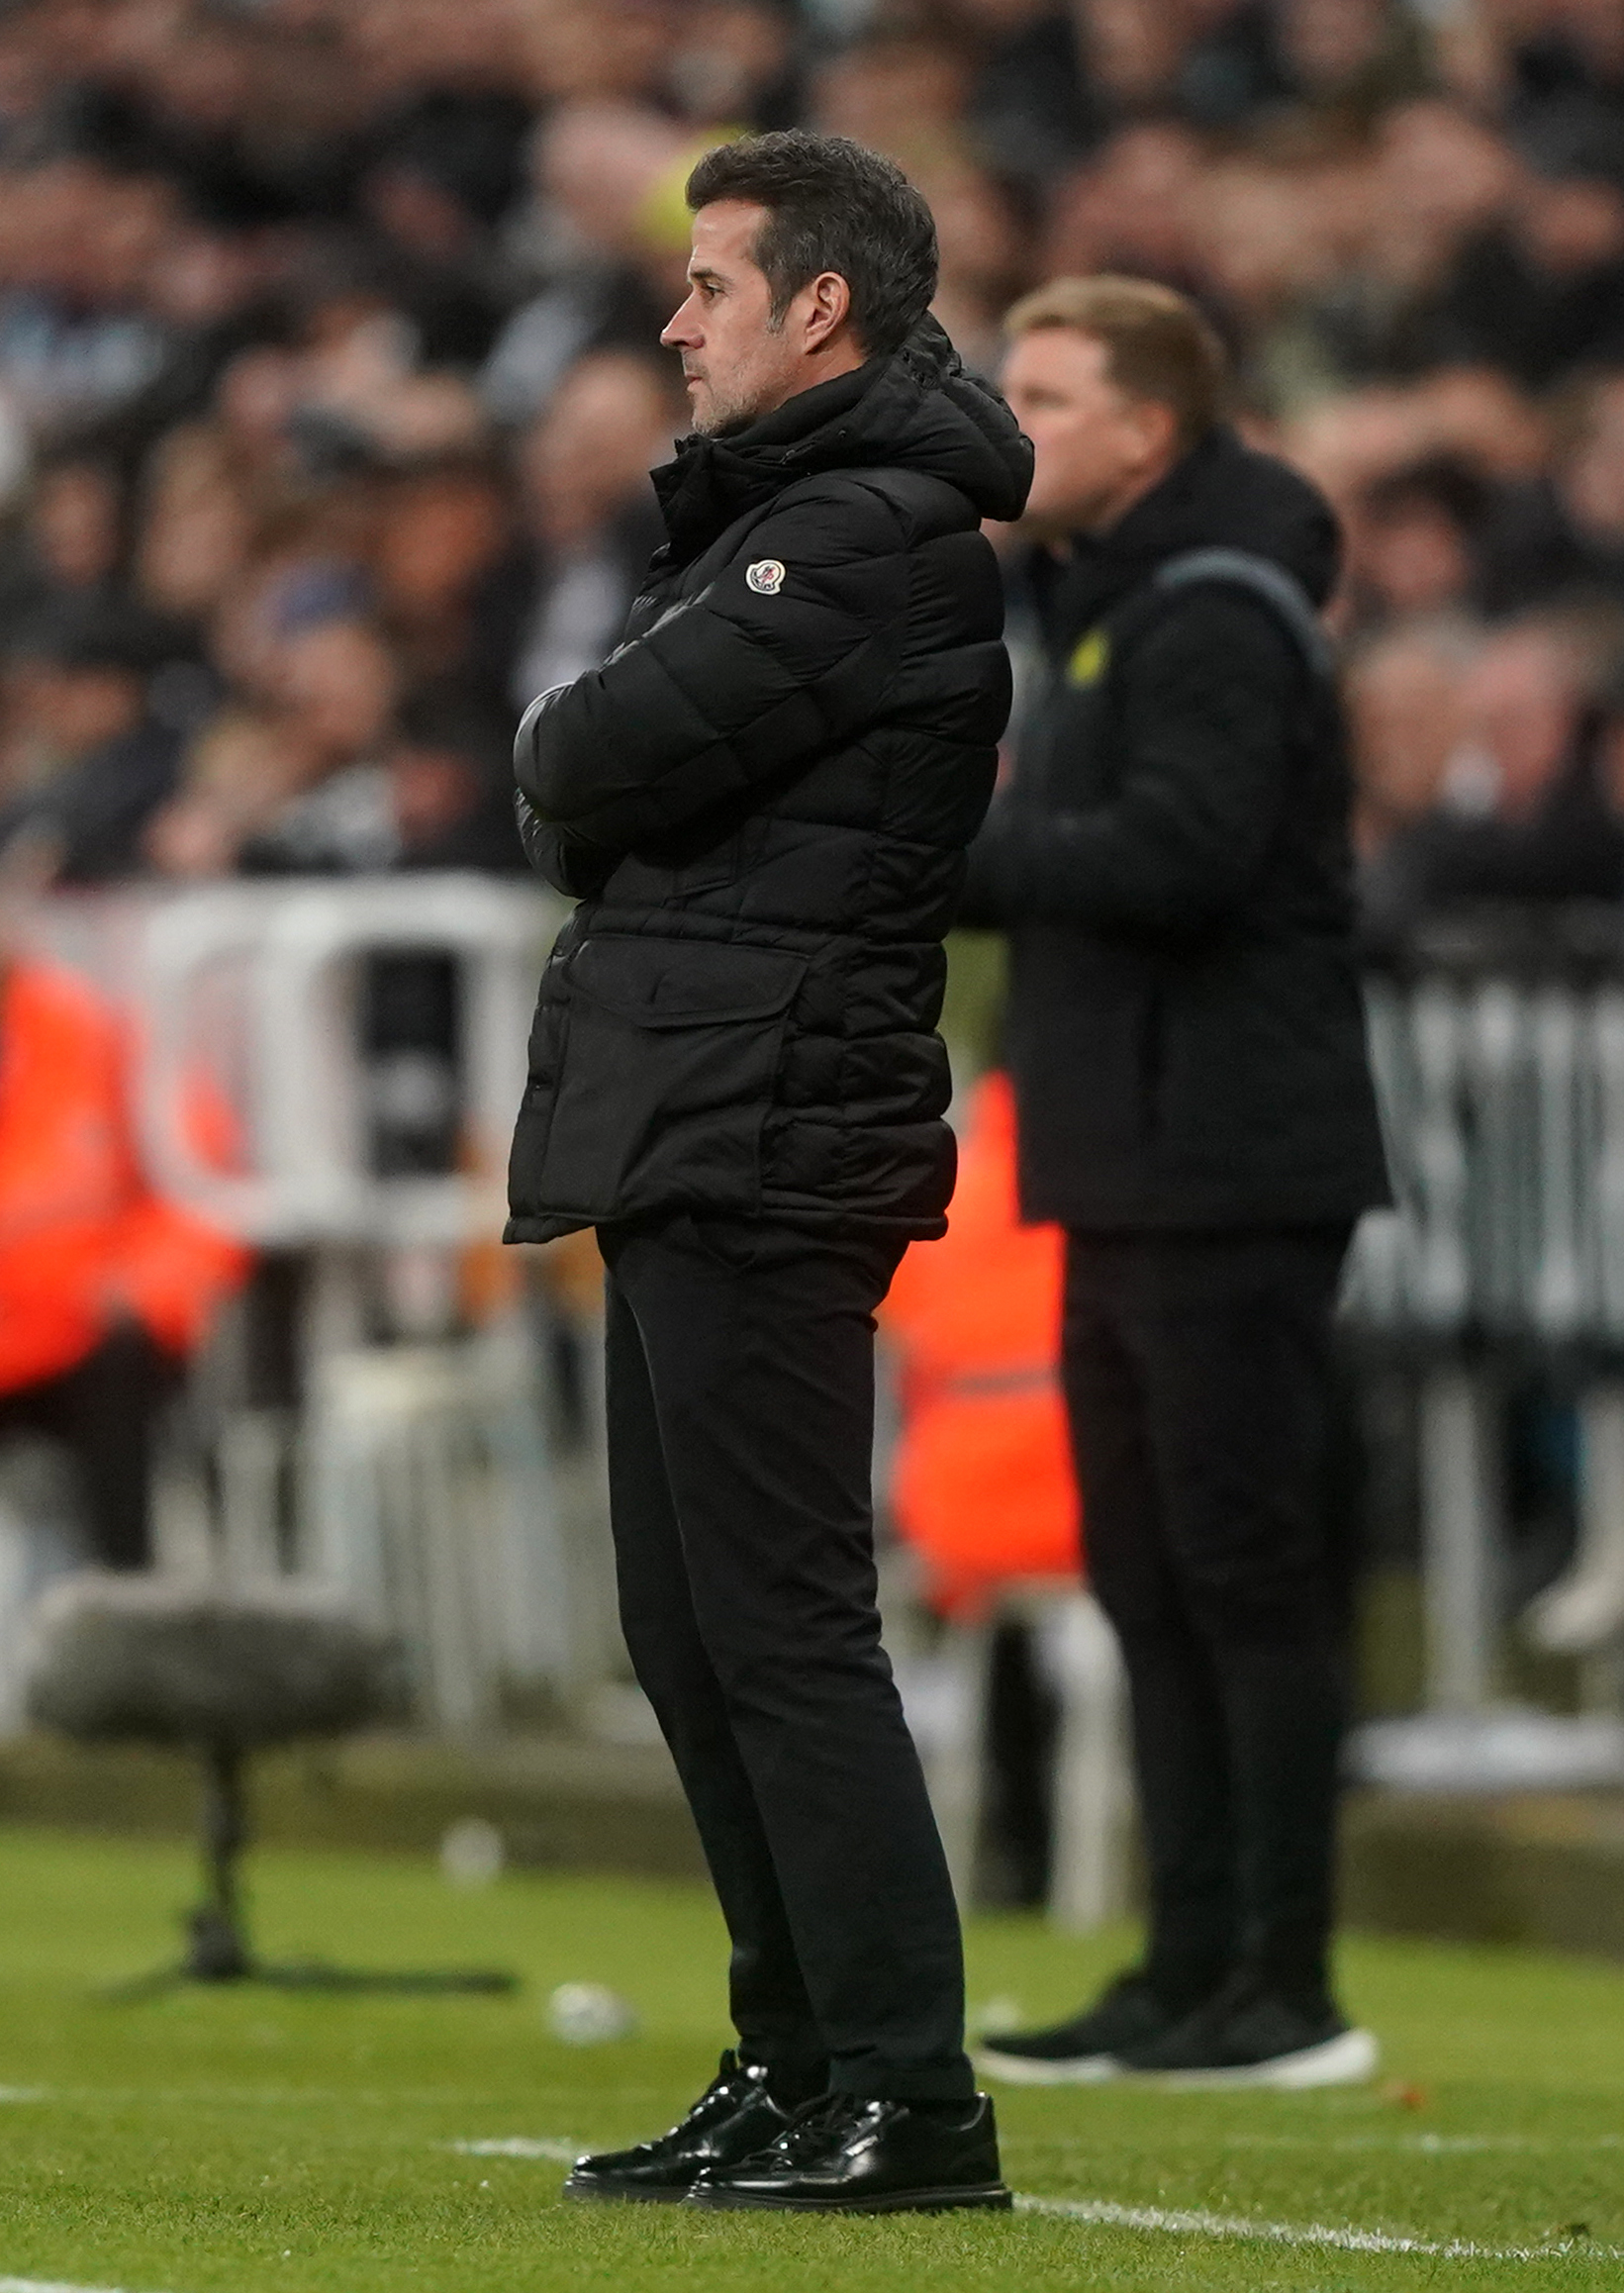 Fulham boss Marco Silva was unhappy with referee Sam Barrott's performance at St James' Park